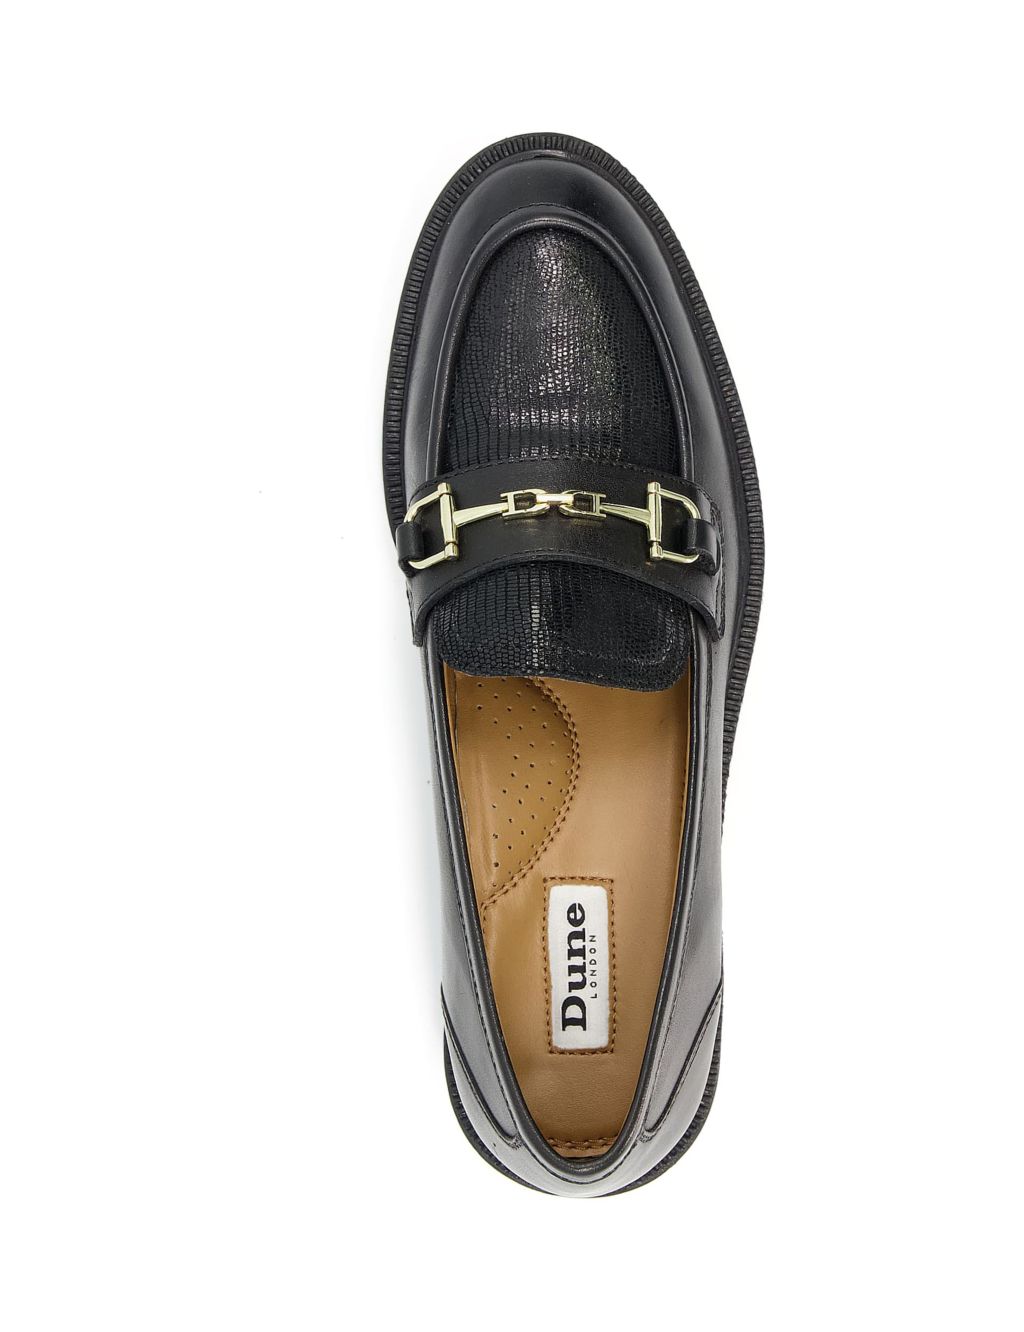 Leather Bar Trim Flat Loafers image 3